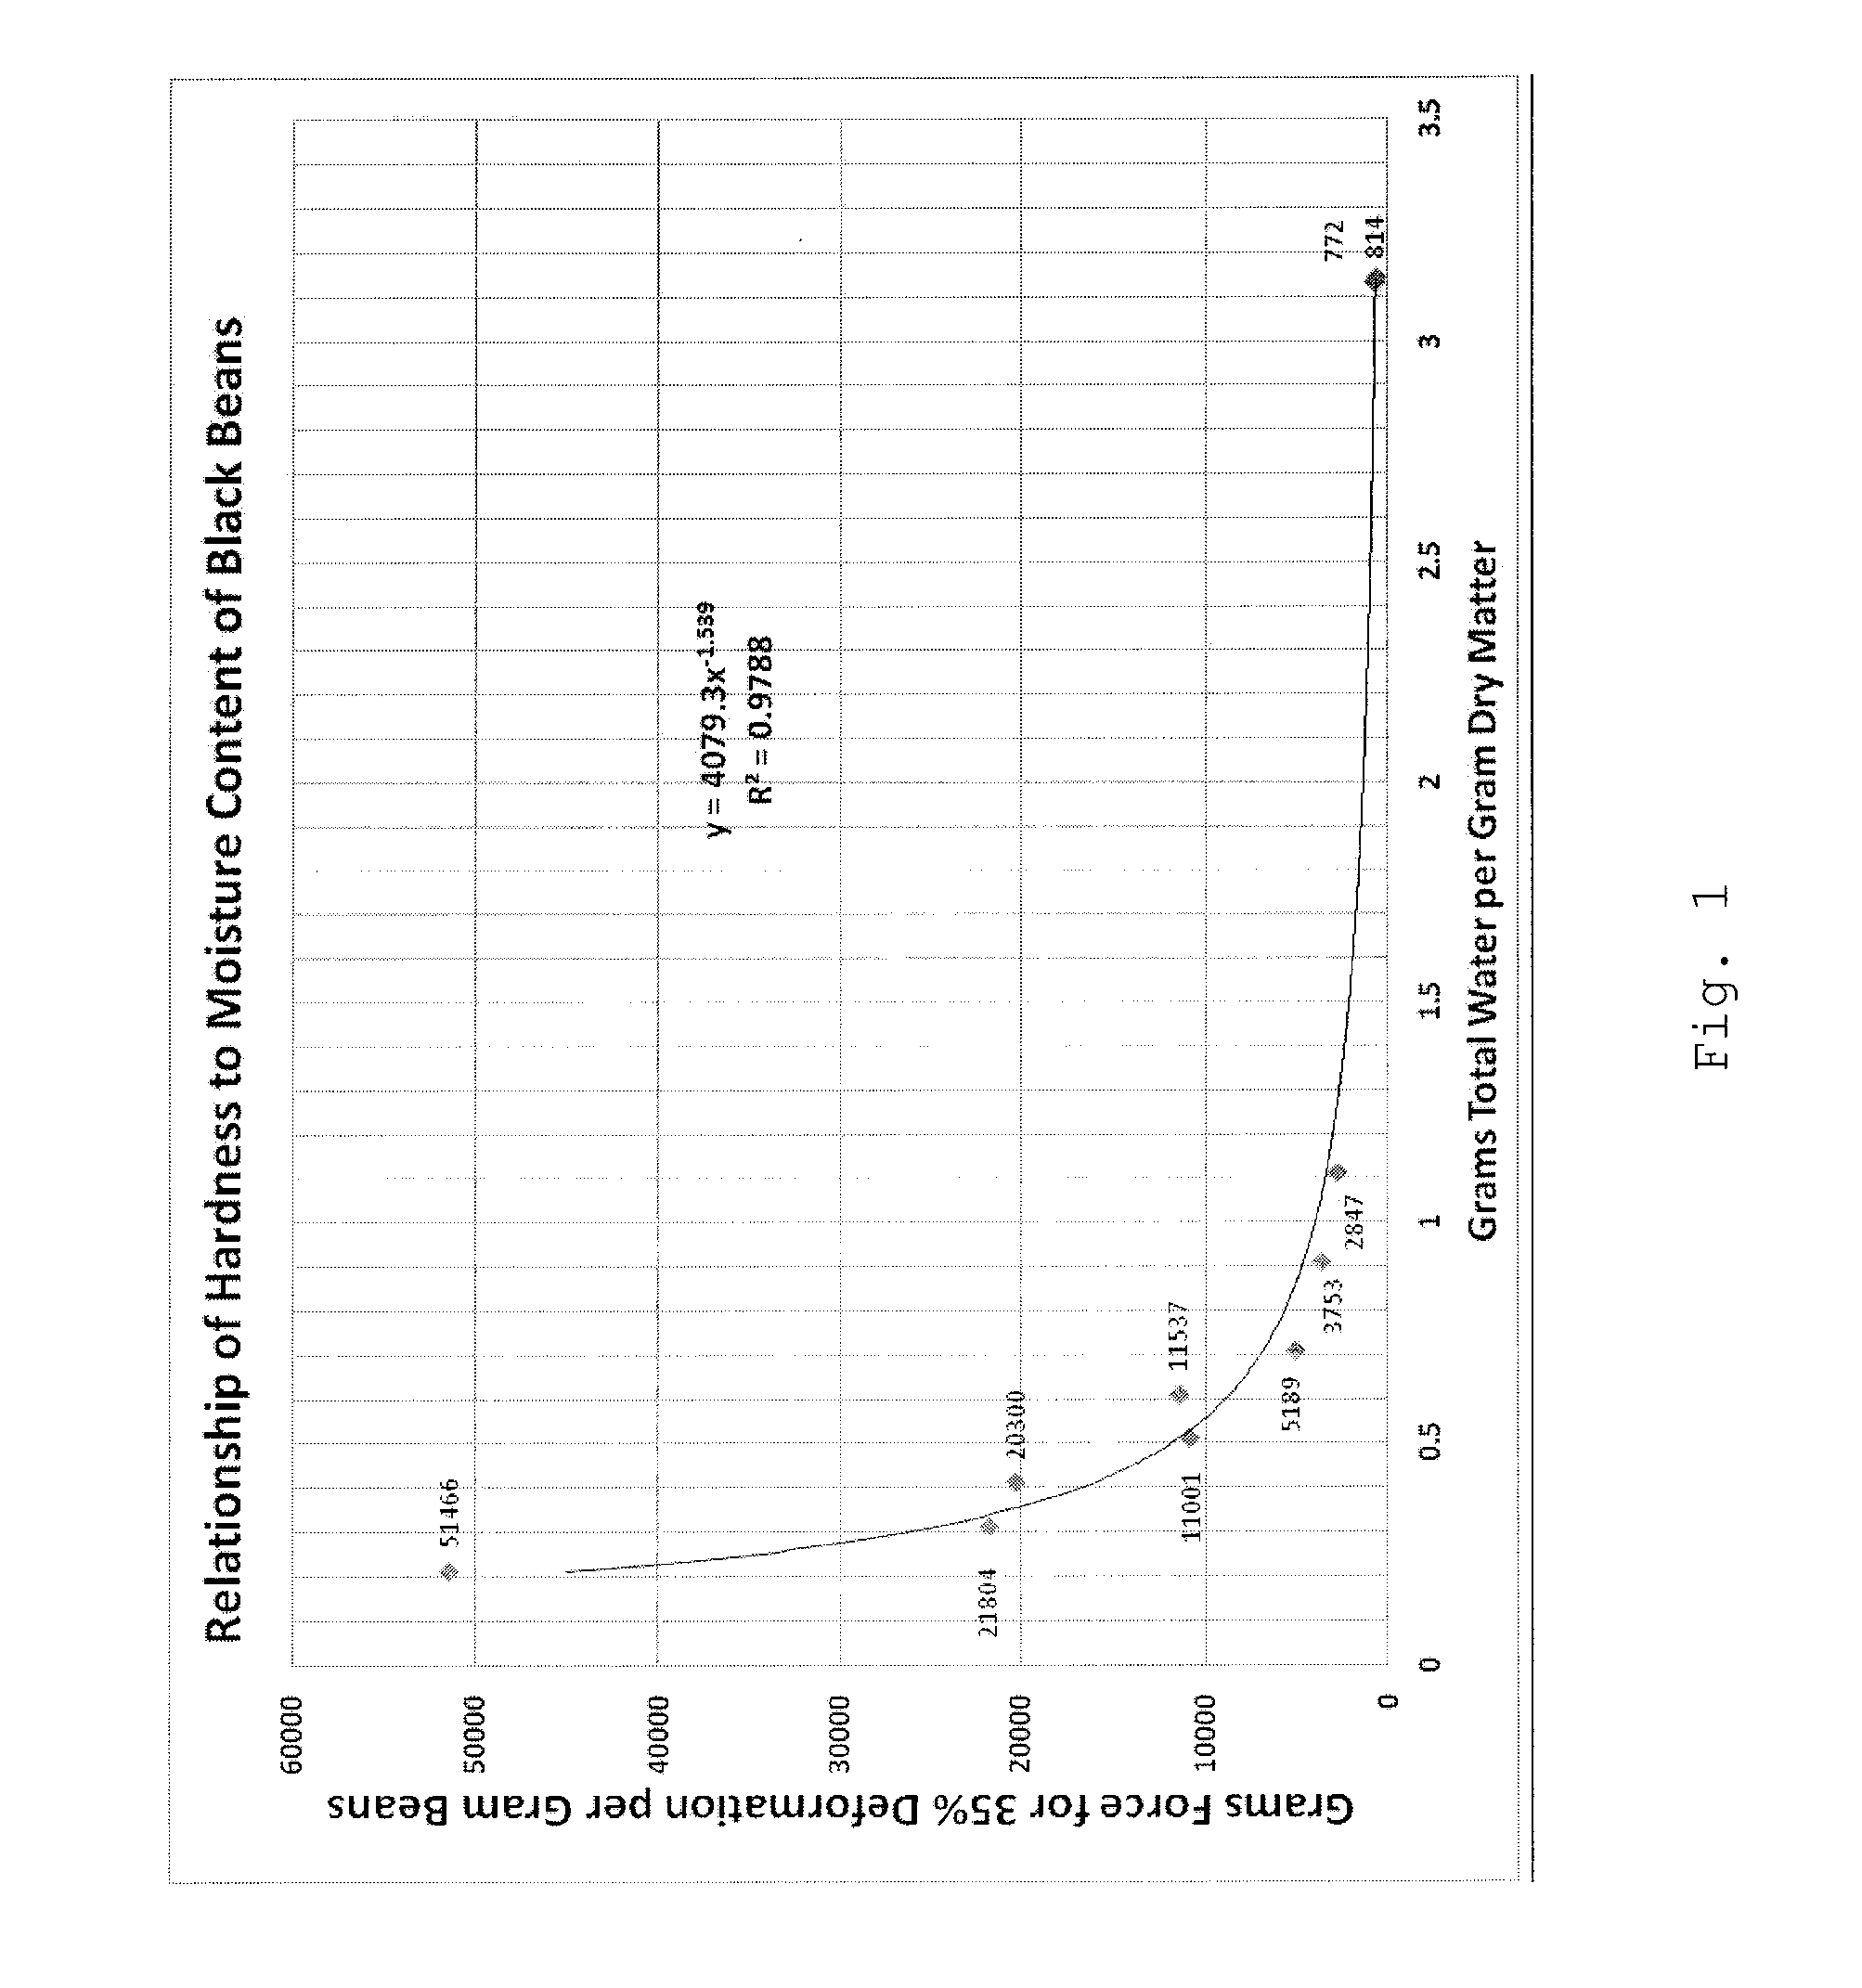 Thermally processed seed product and method